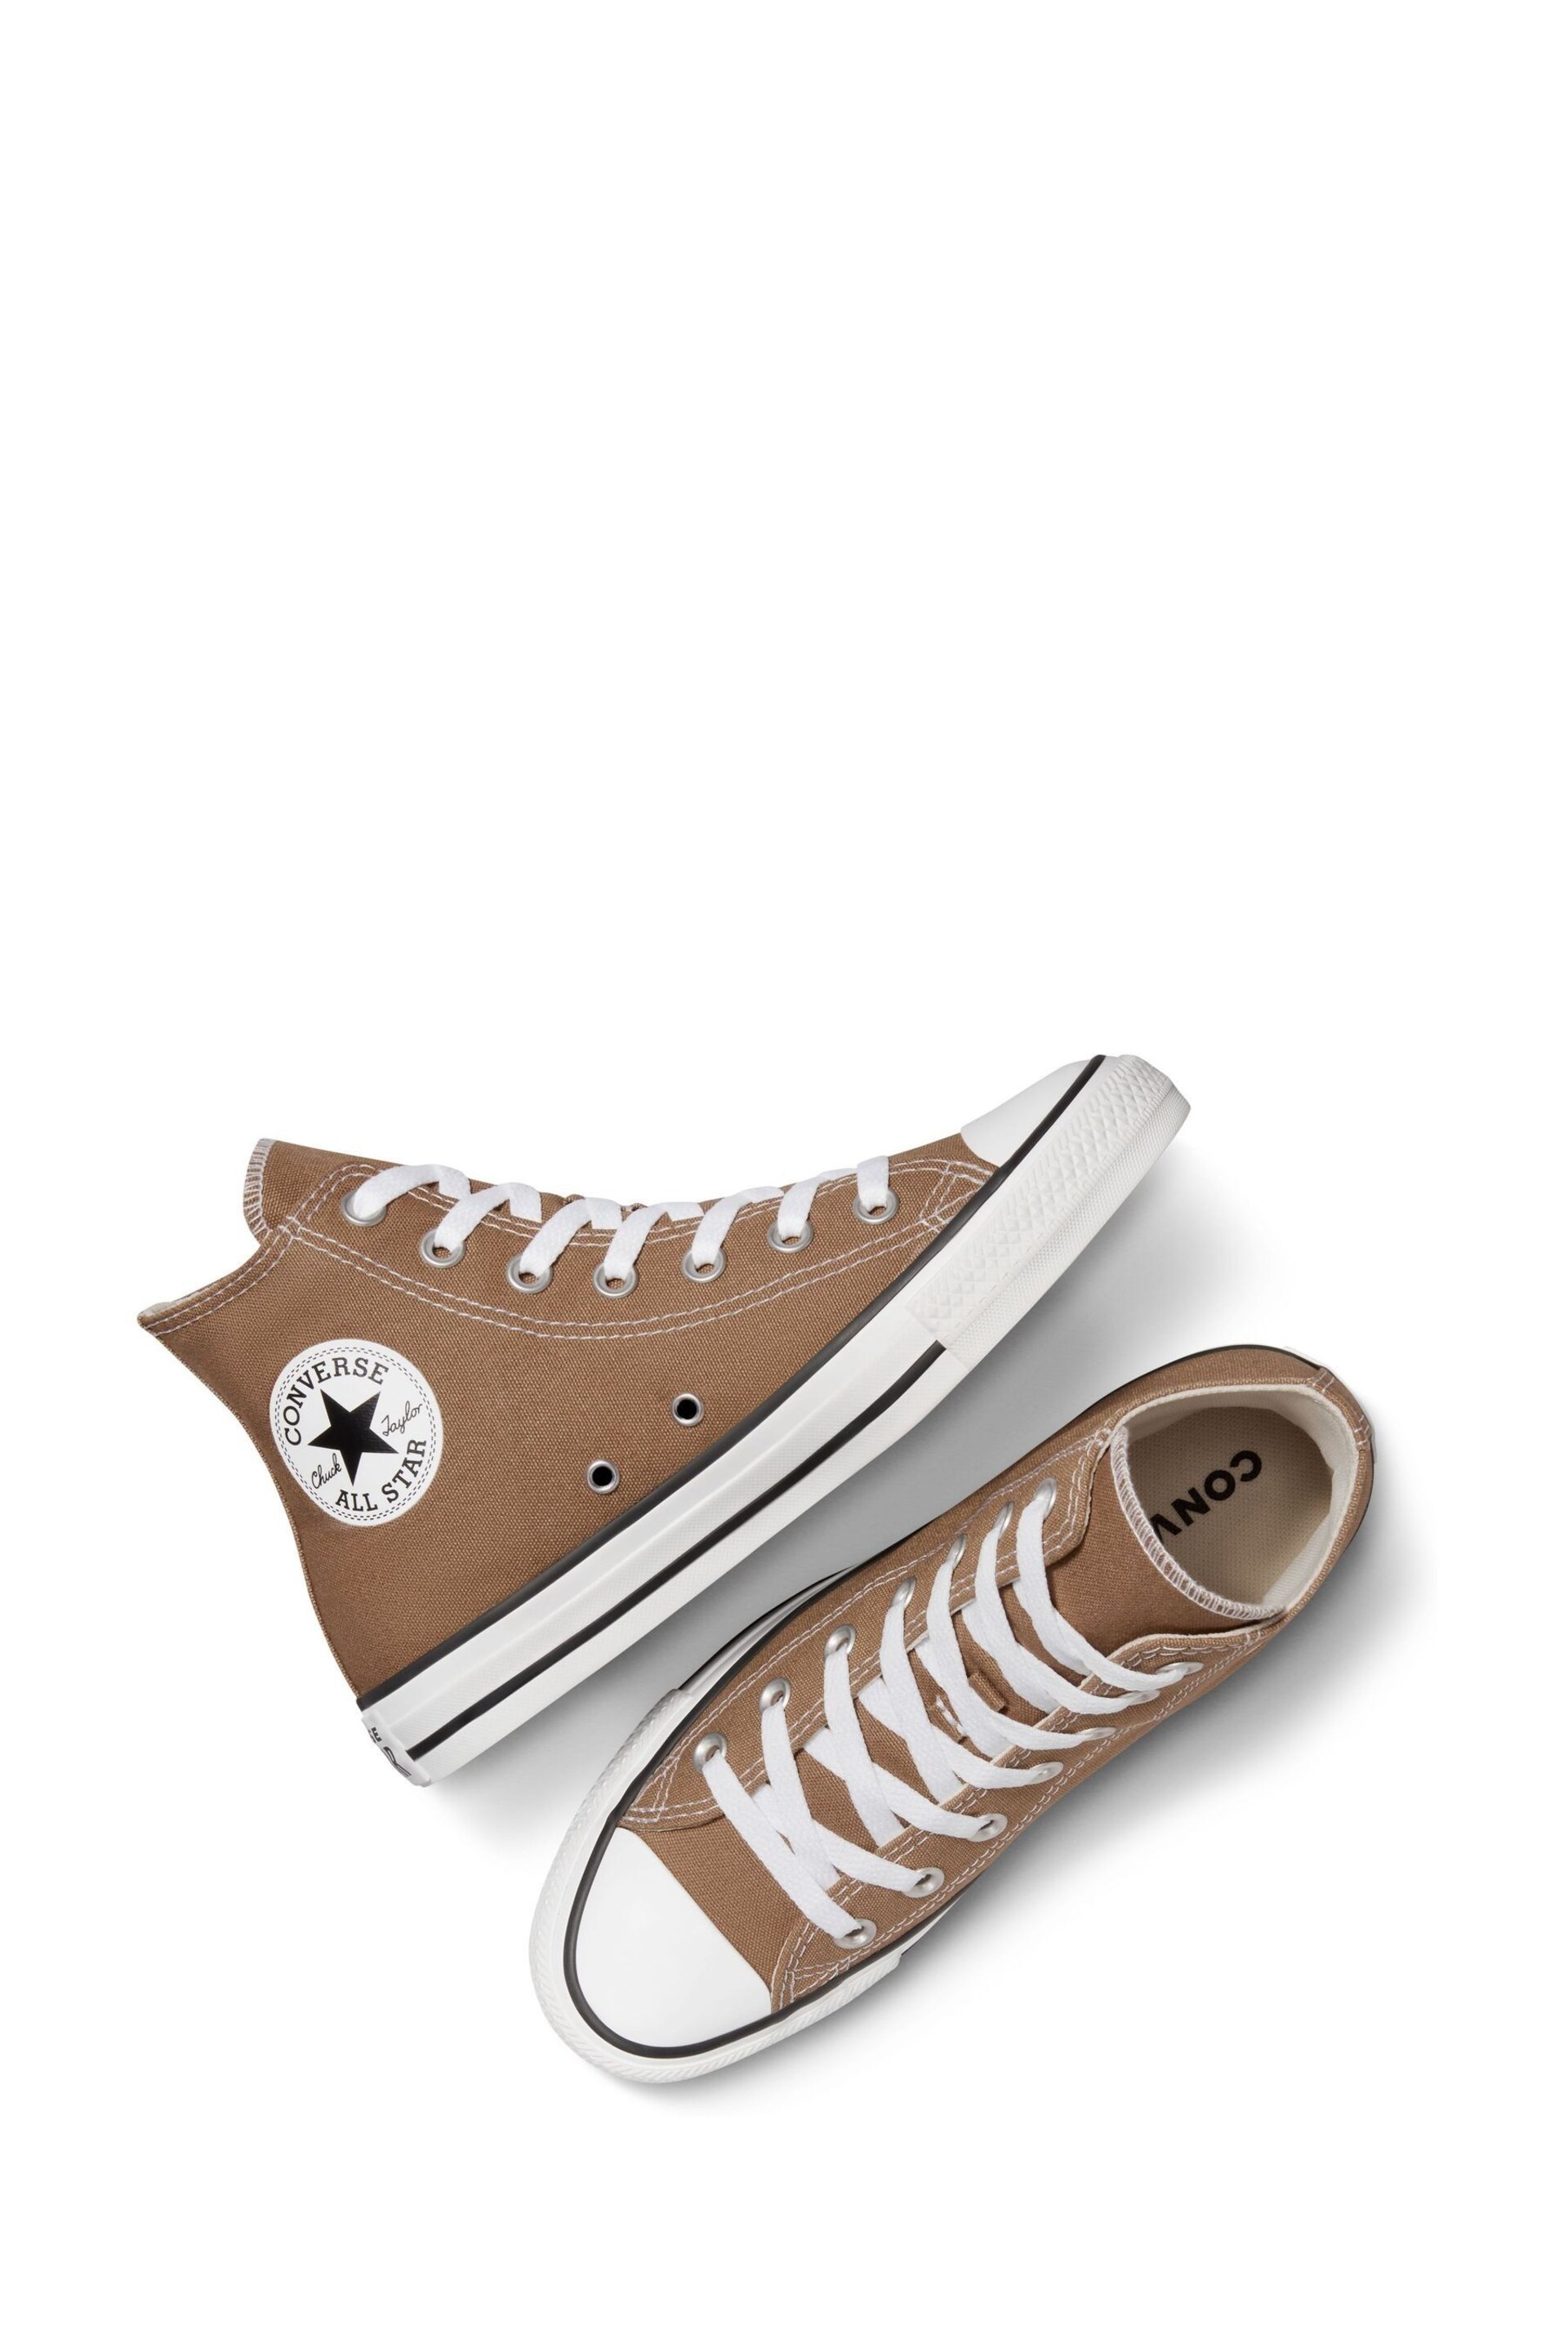 Converse Natural Chuck Taylor All Star Trainers - Image 7 of 9